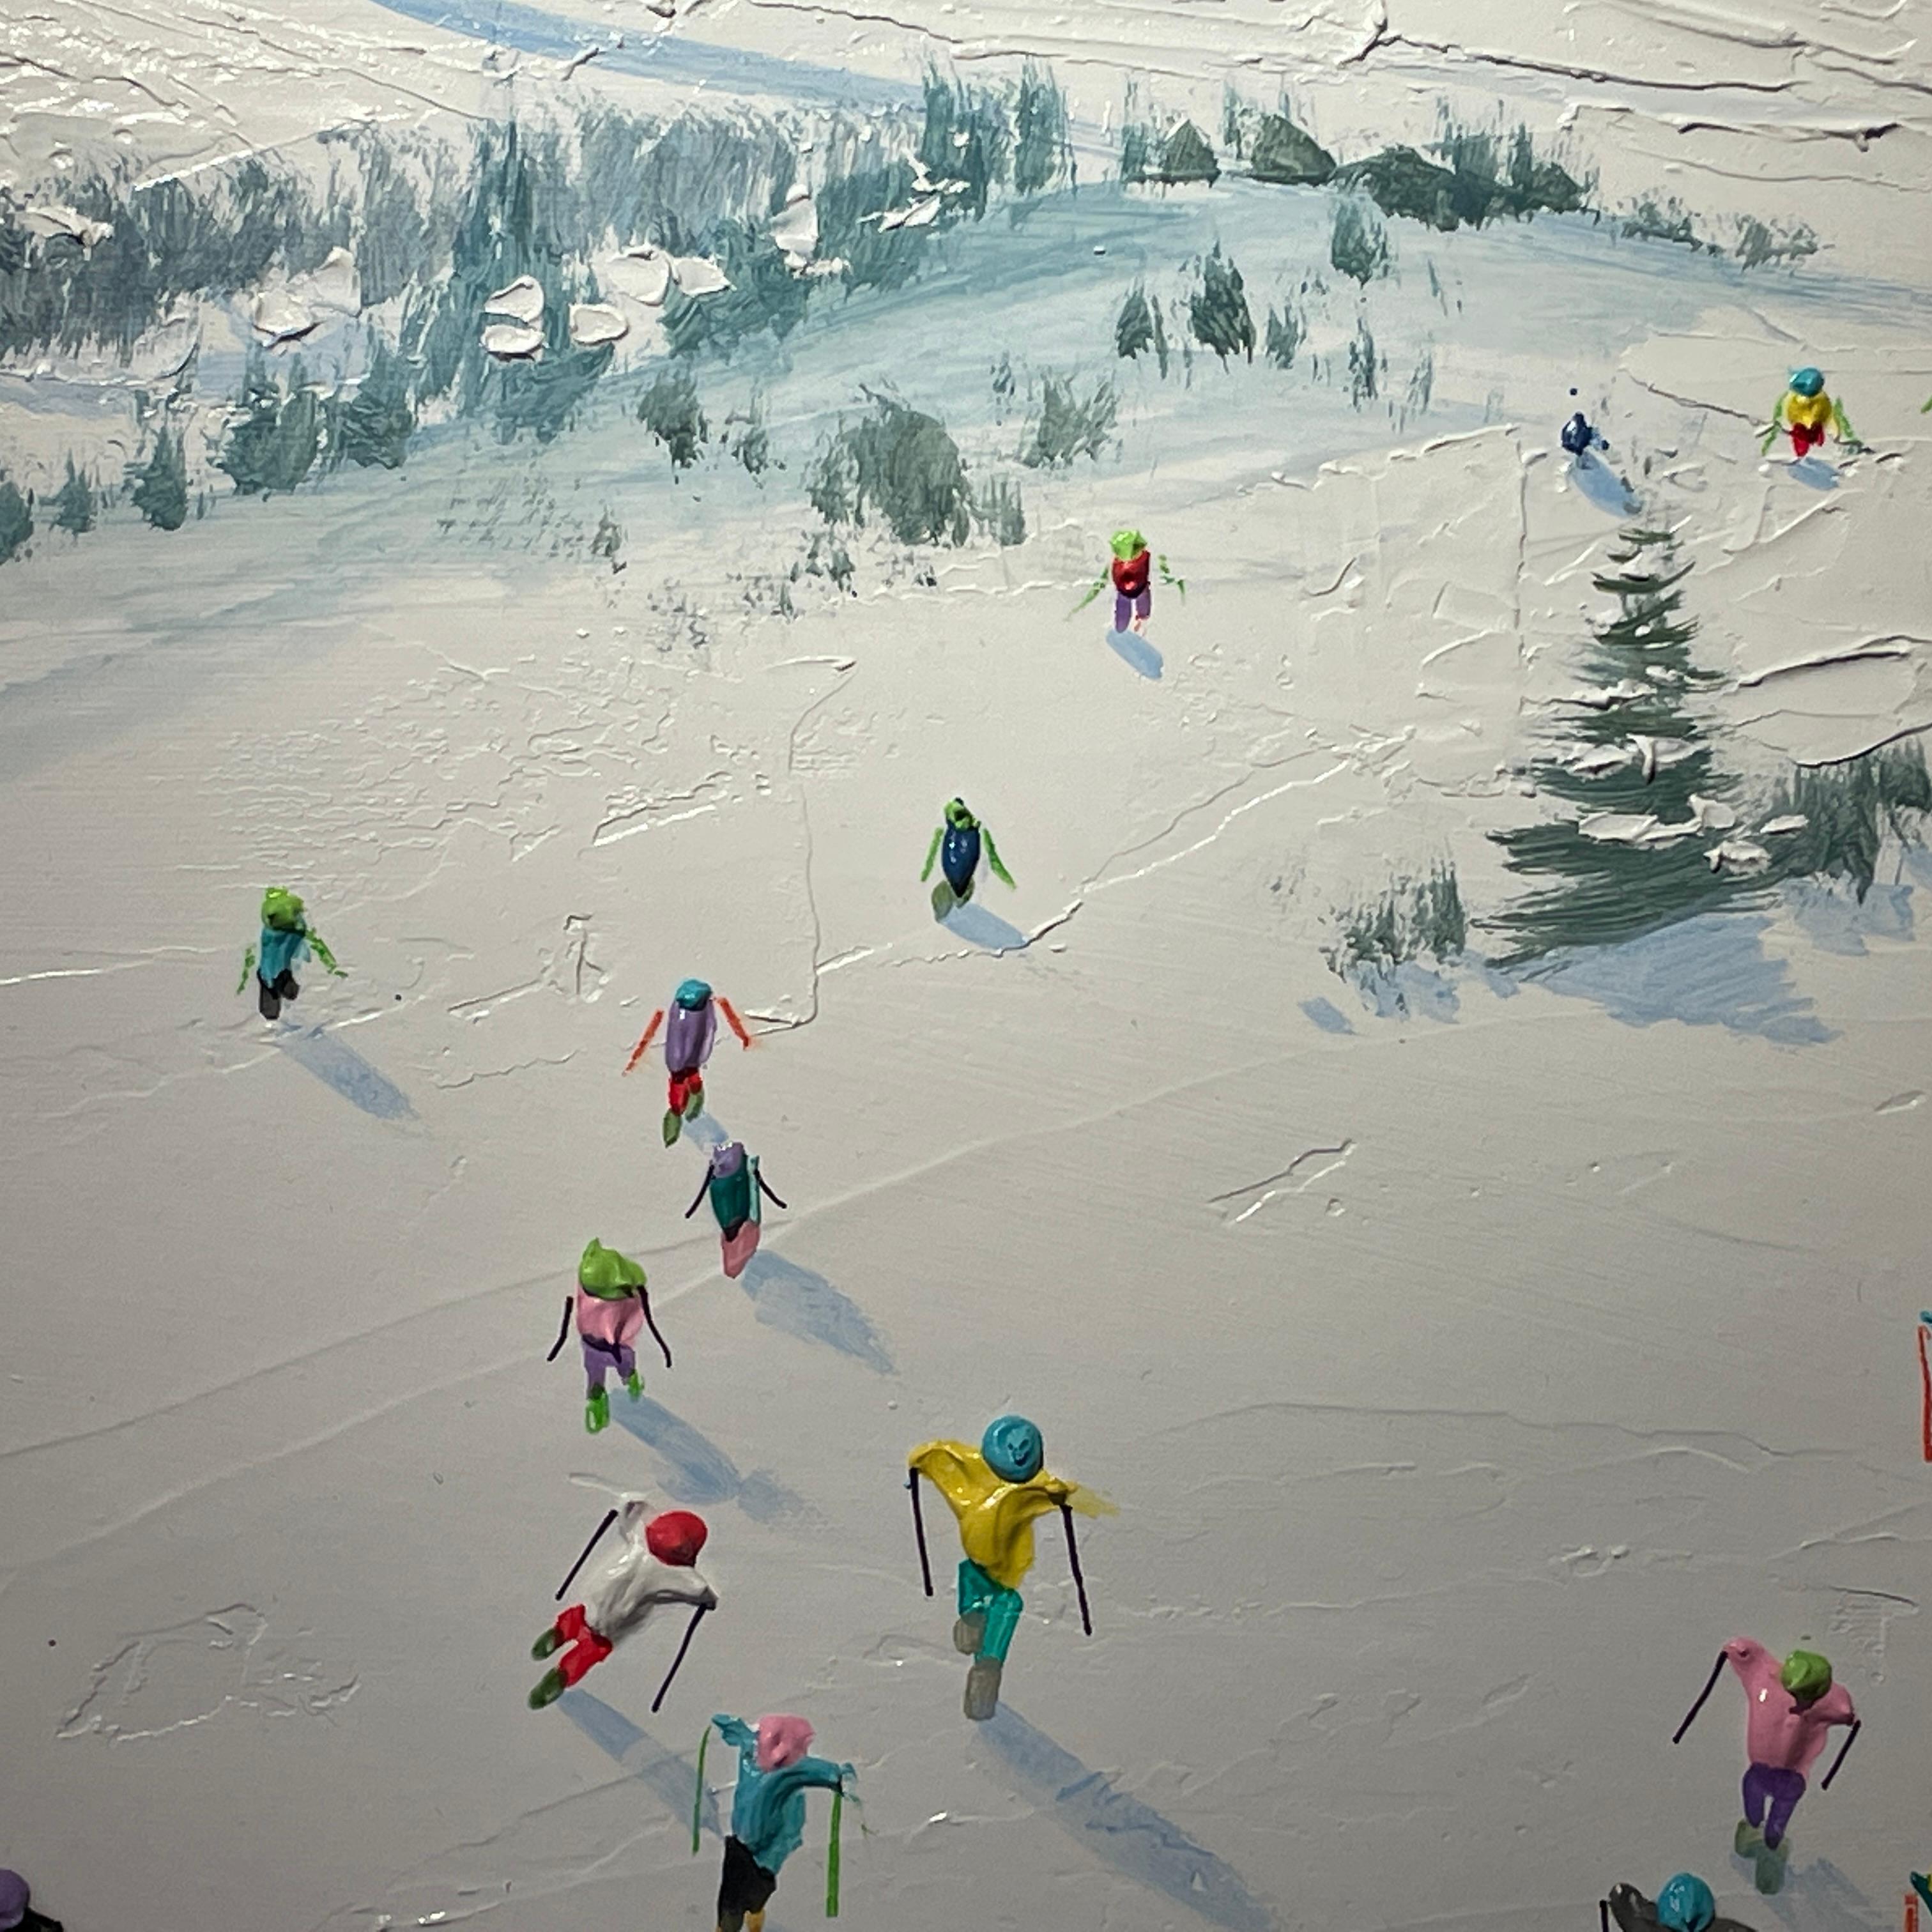 'Winter Break' is a fun and vibrant contemporary 3D painting of skiers, mountains, trees and figures by Max Todd. Inspired by skiing holidays Todd has created a work that makes you dream of the slopes! 

Max Todd uses contemporary techniques to